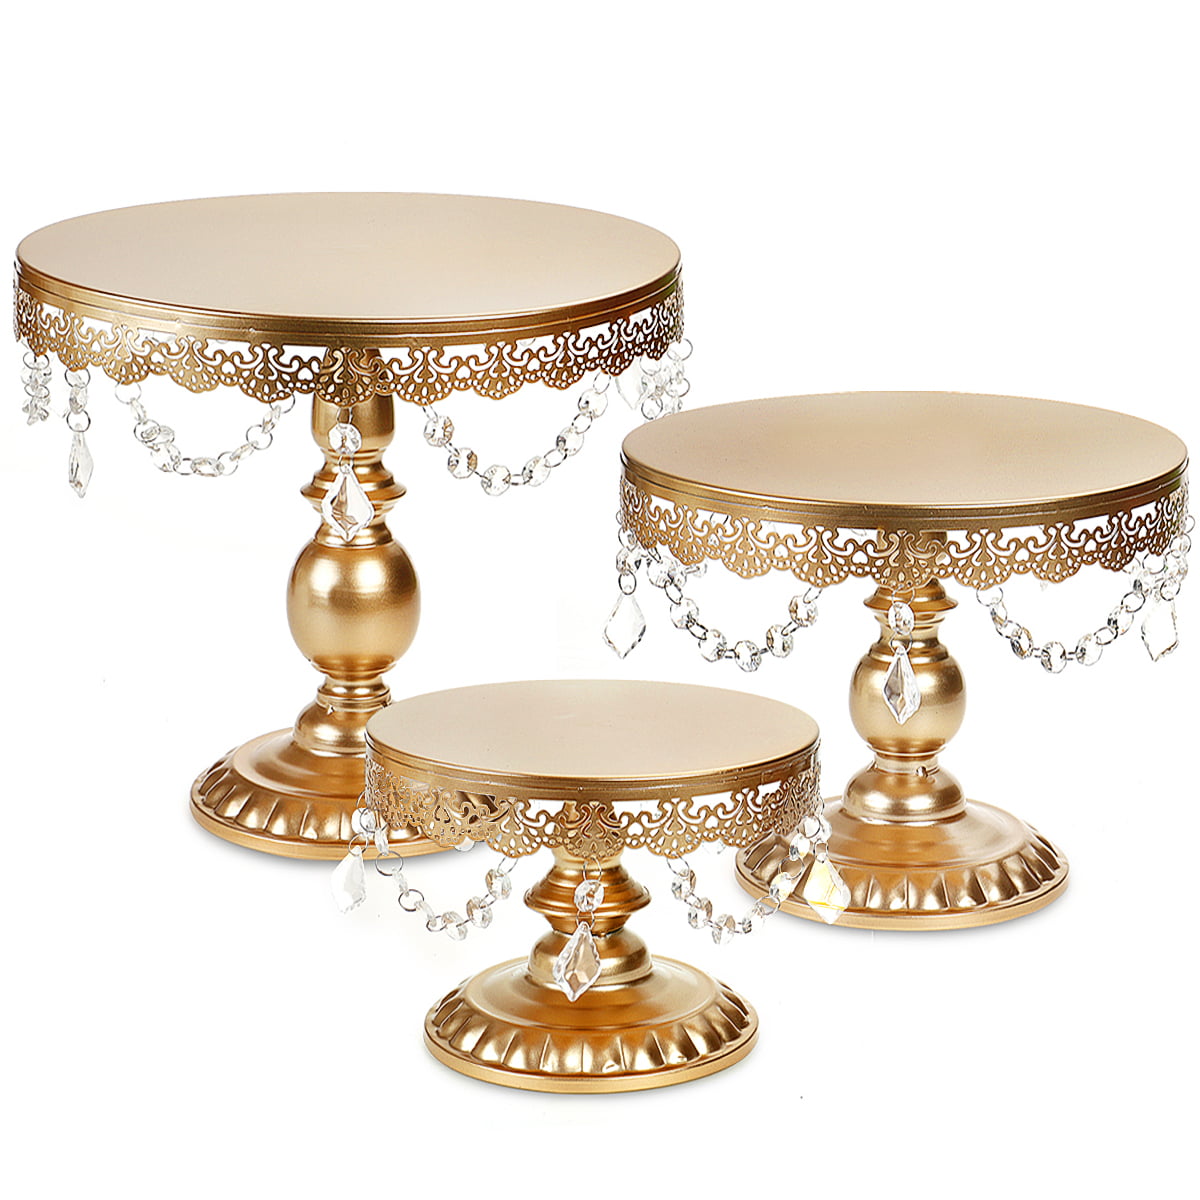 Cake Stand 28cm Stainless Steel Cake Stand Cake Plate Cupcake Stand